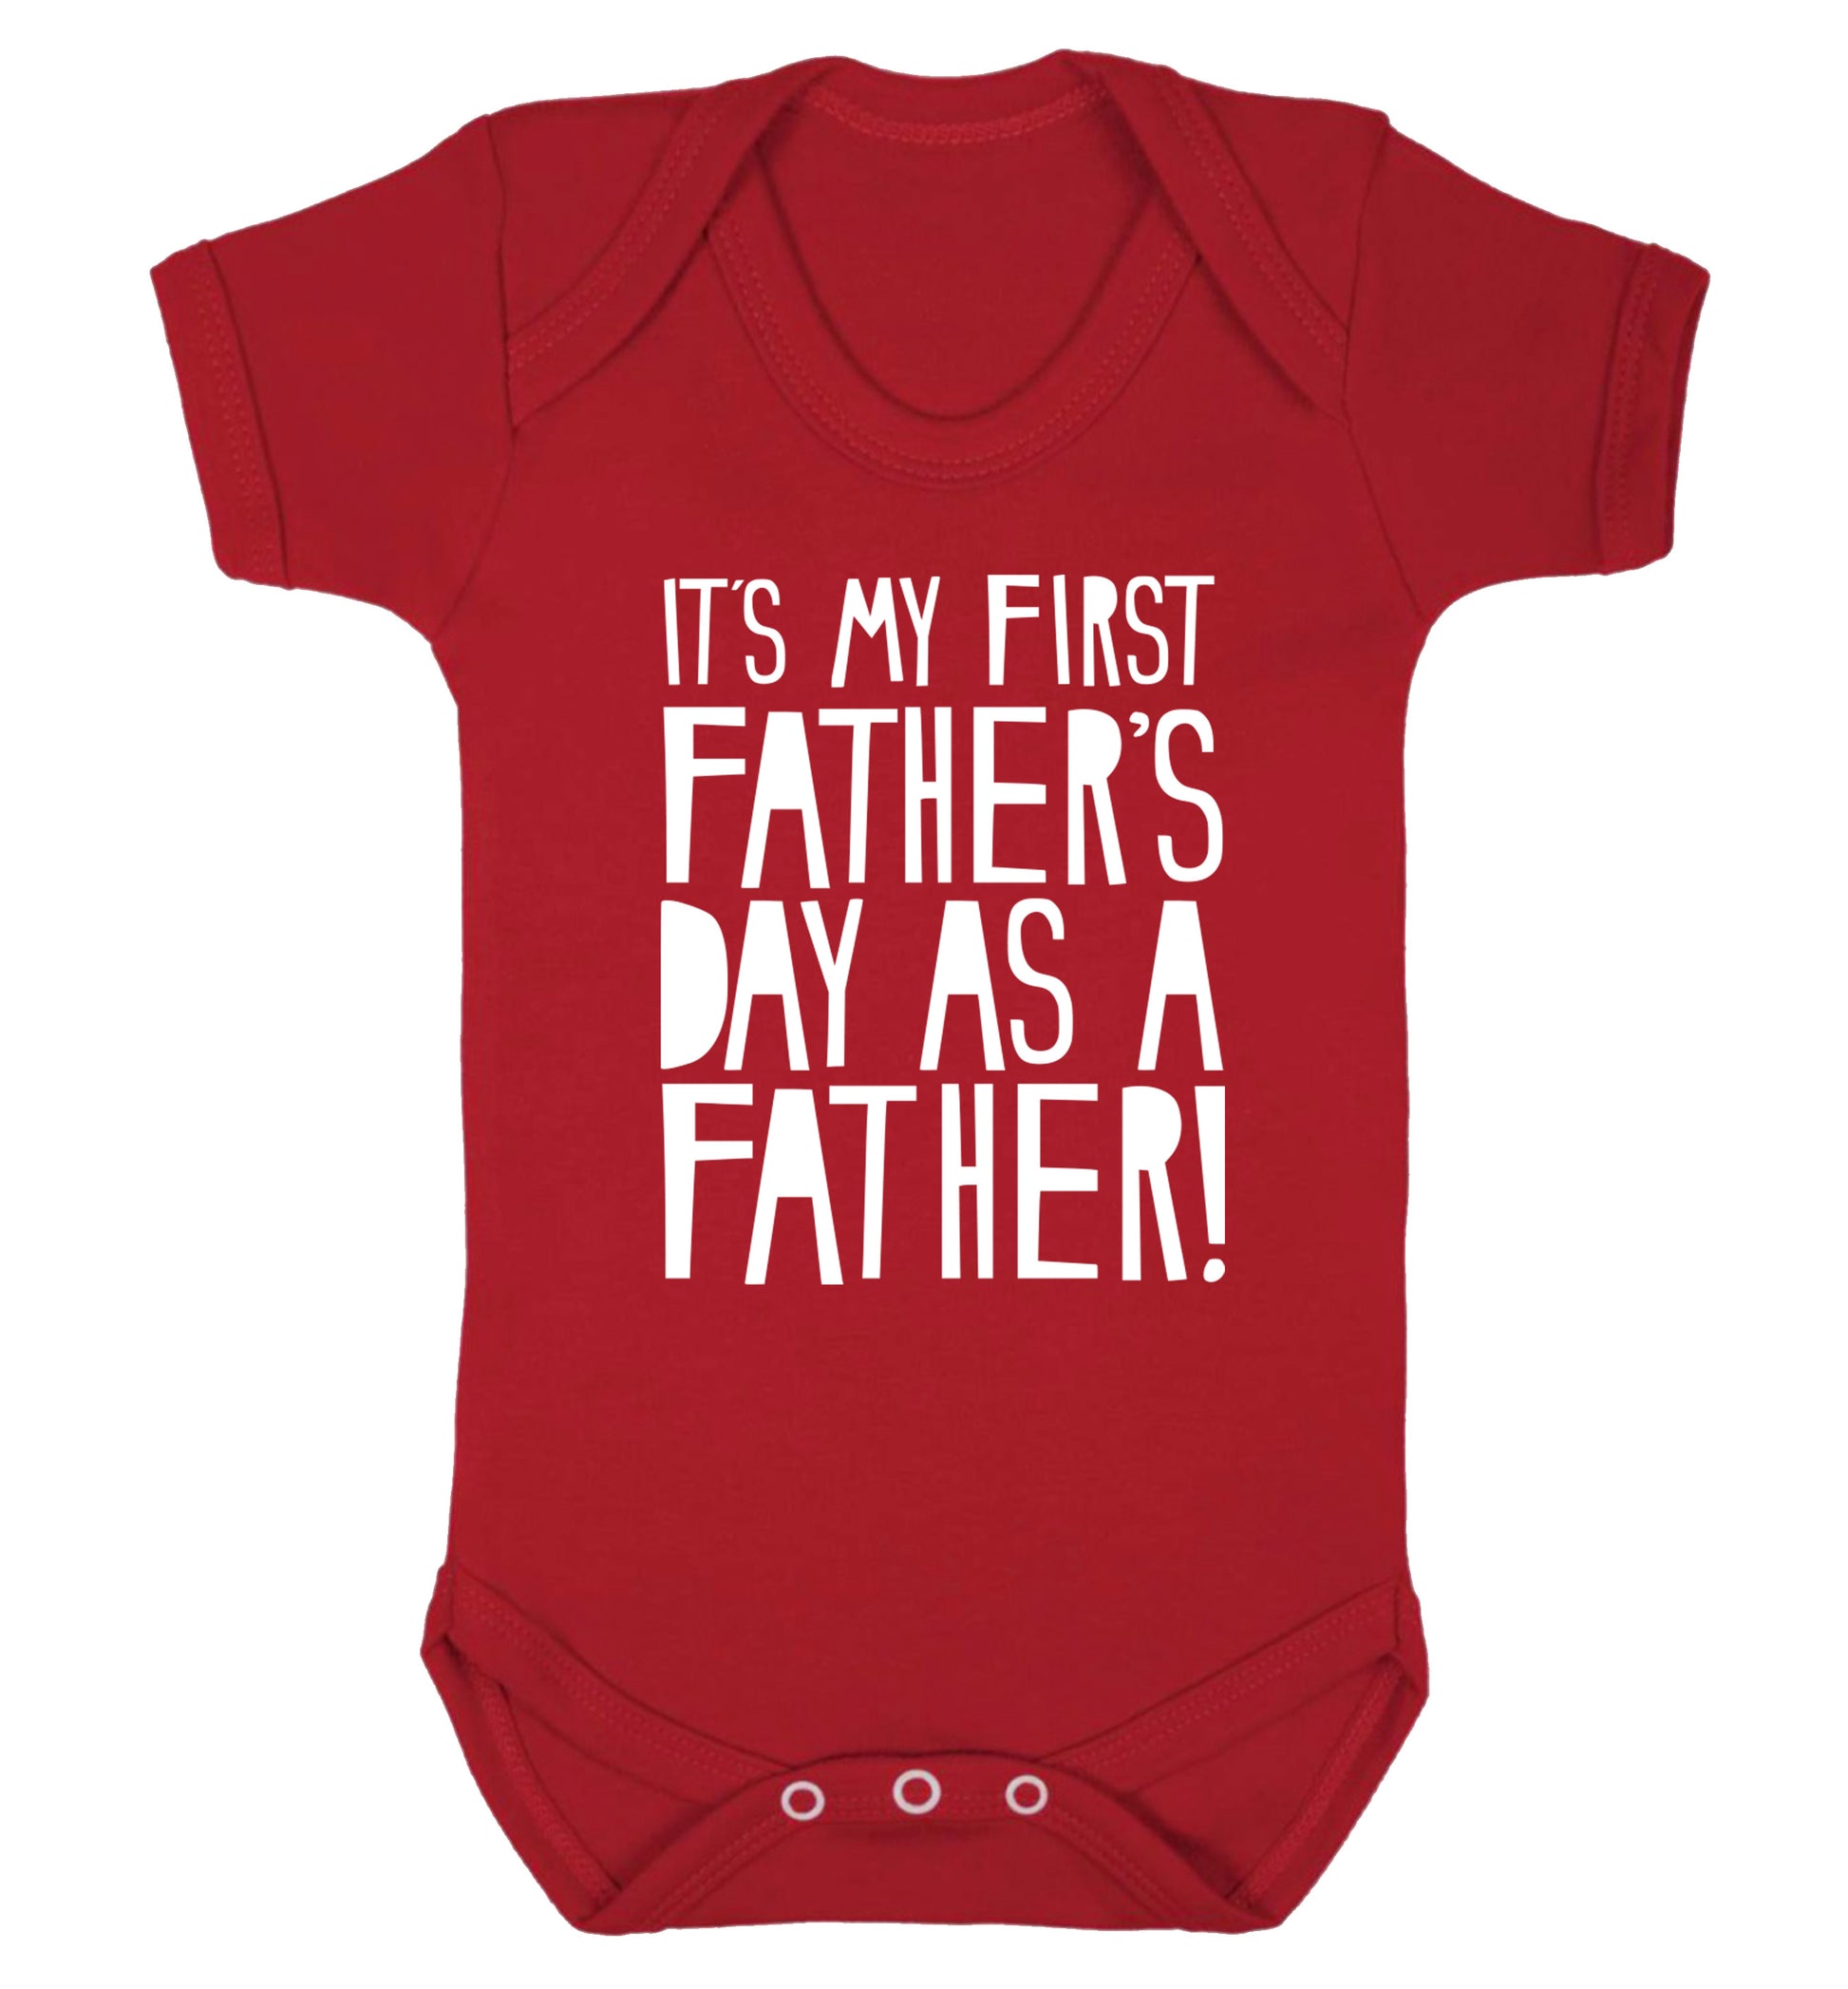 It's my first Father's Day as a father! Baby Vest red 18-24 months